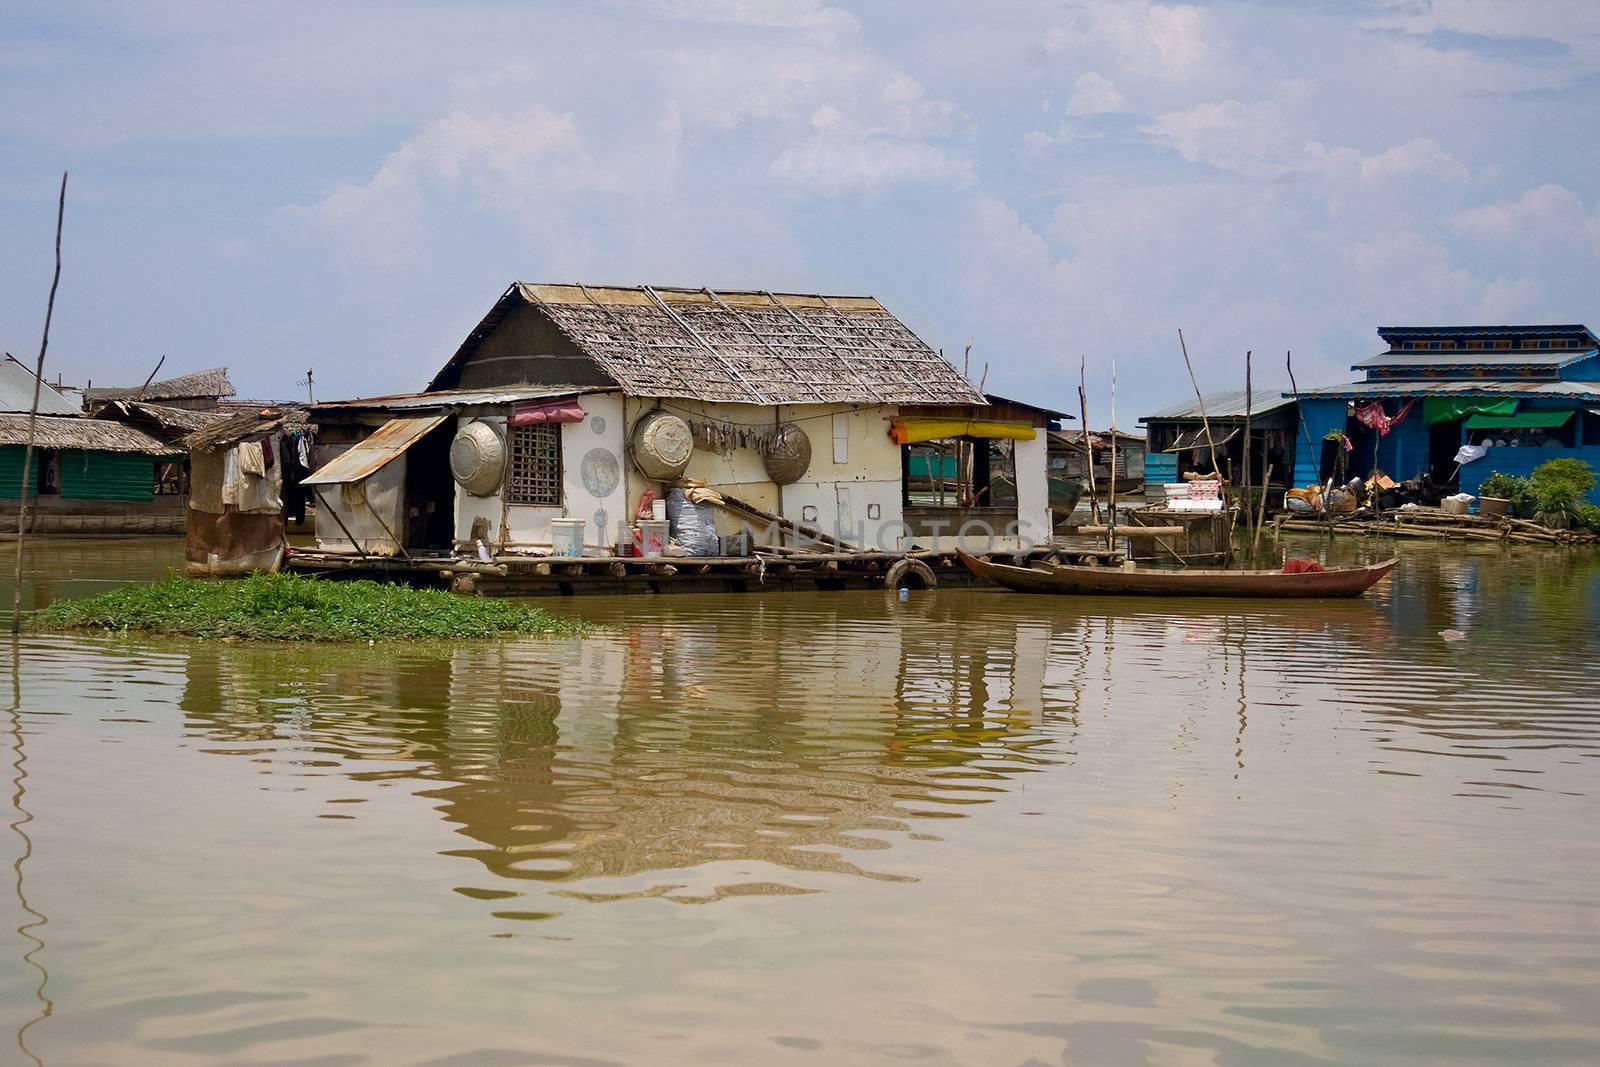 Cambodian Floating Village by foryouinf